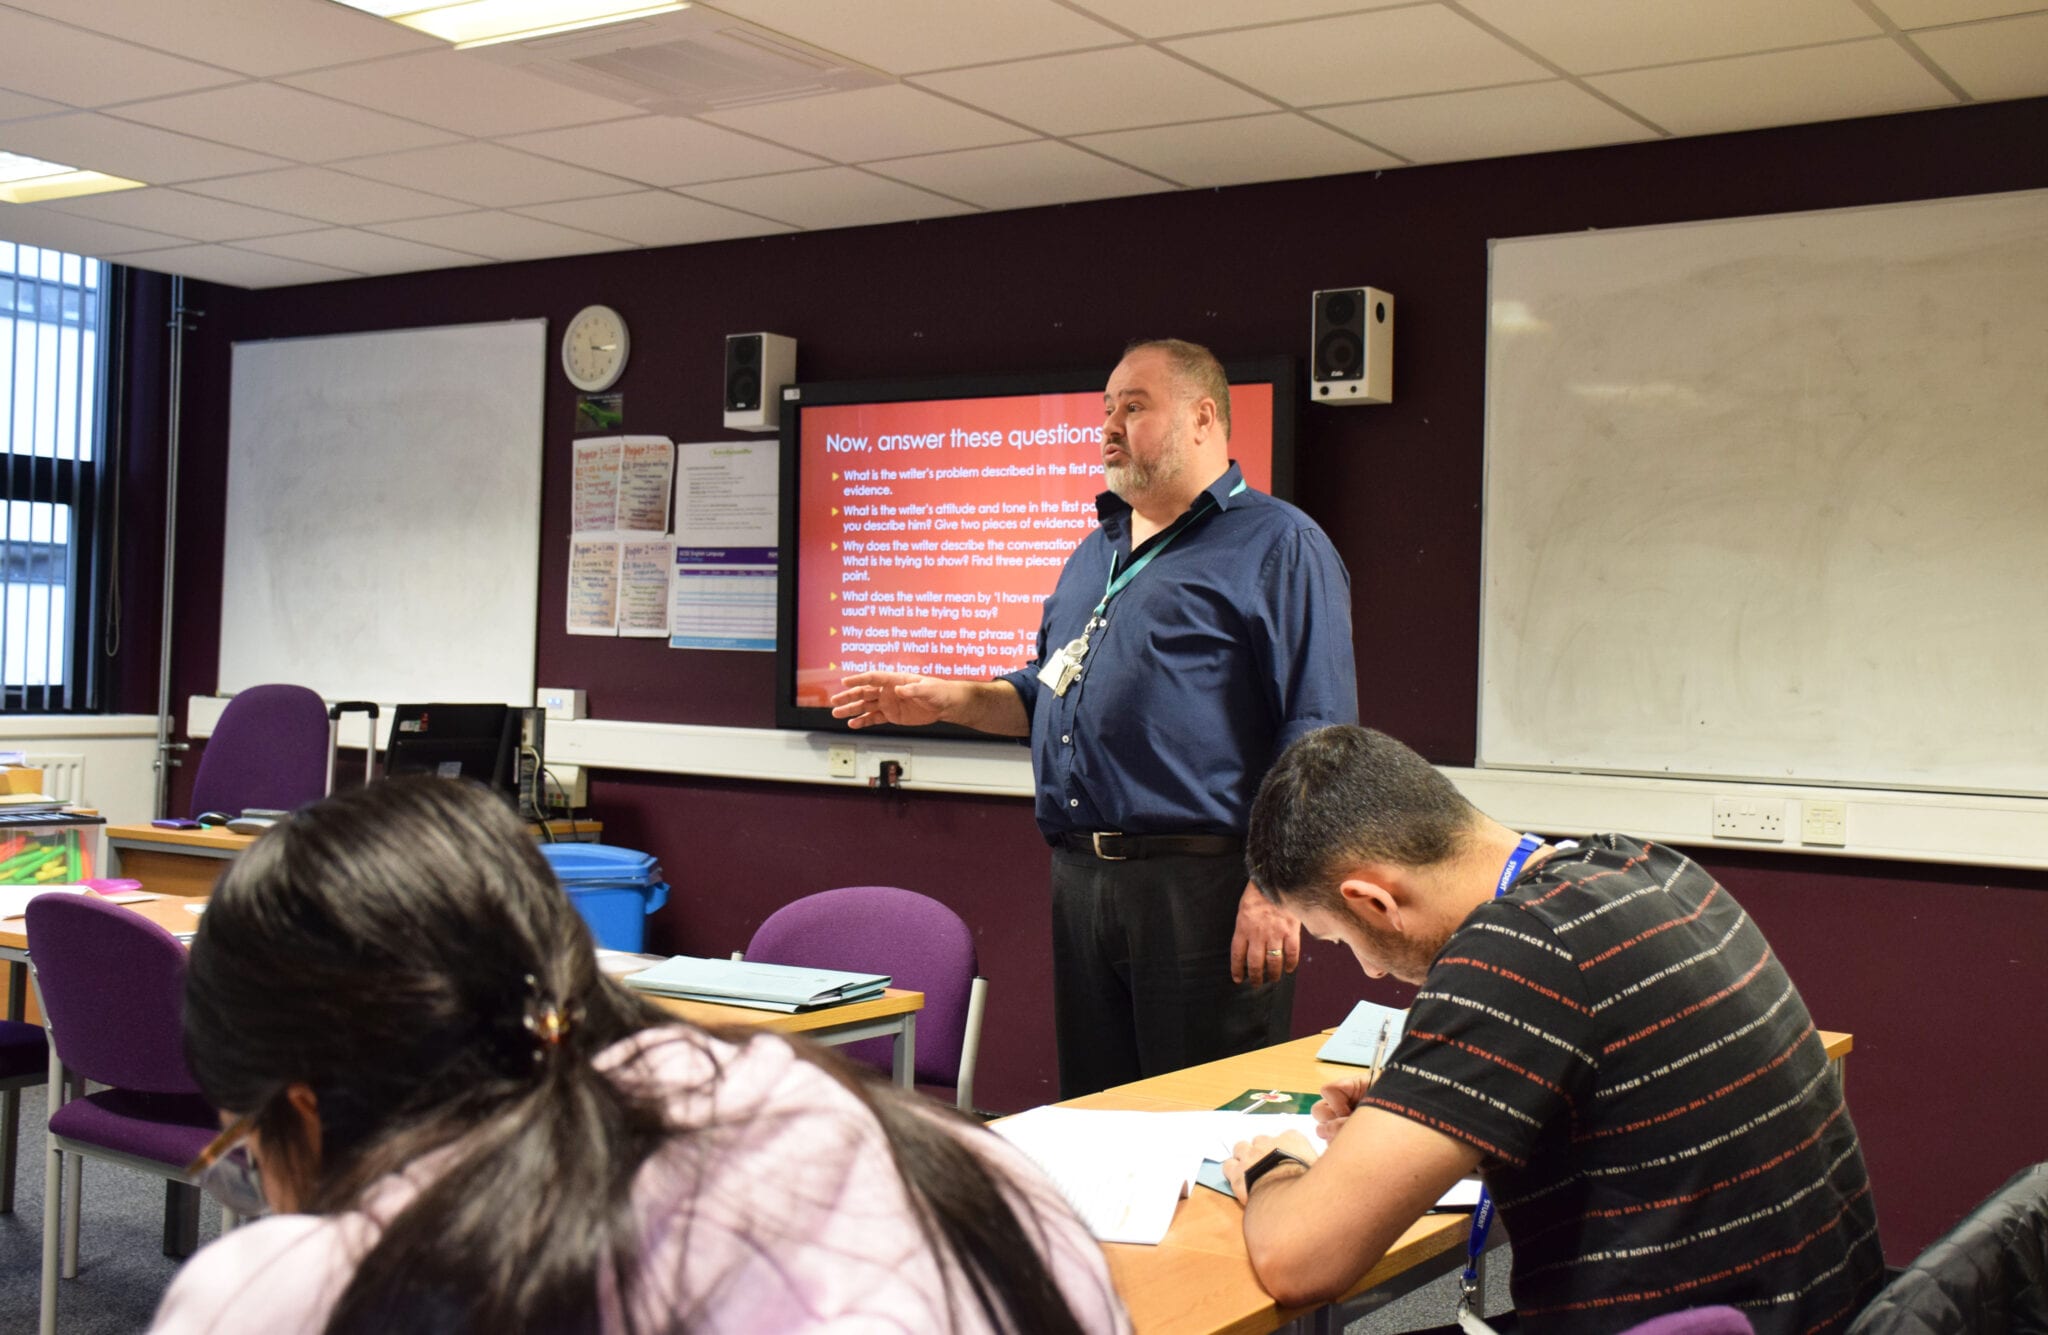 GCSE English Teaching speaking to a class full of students